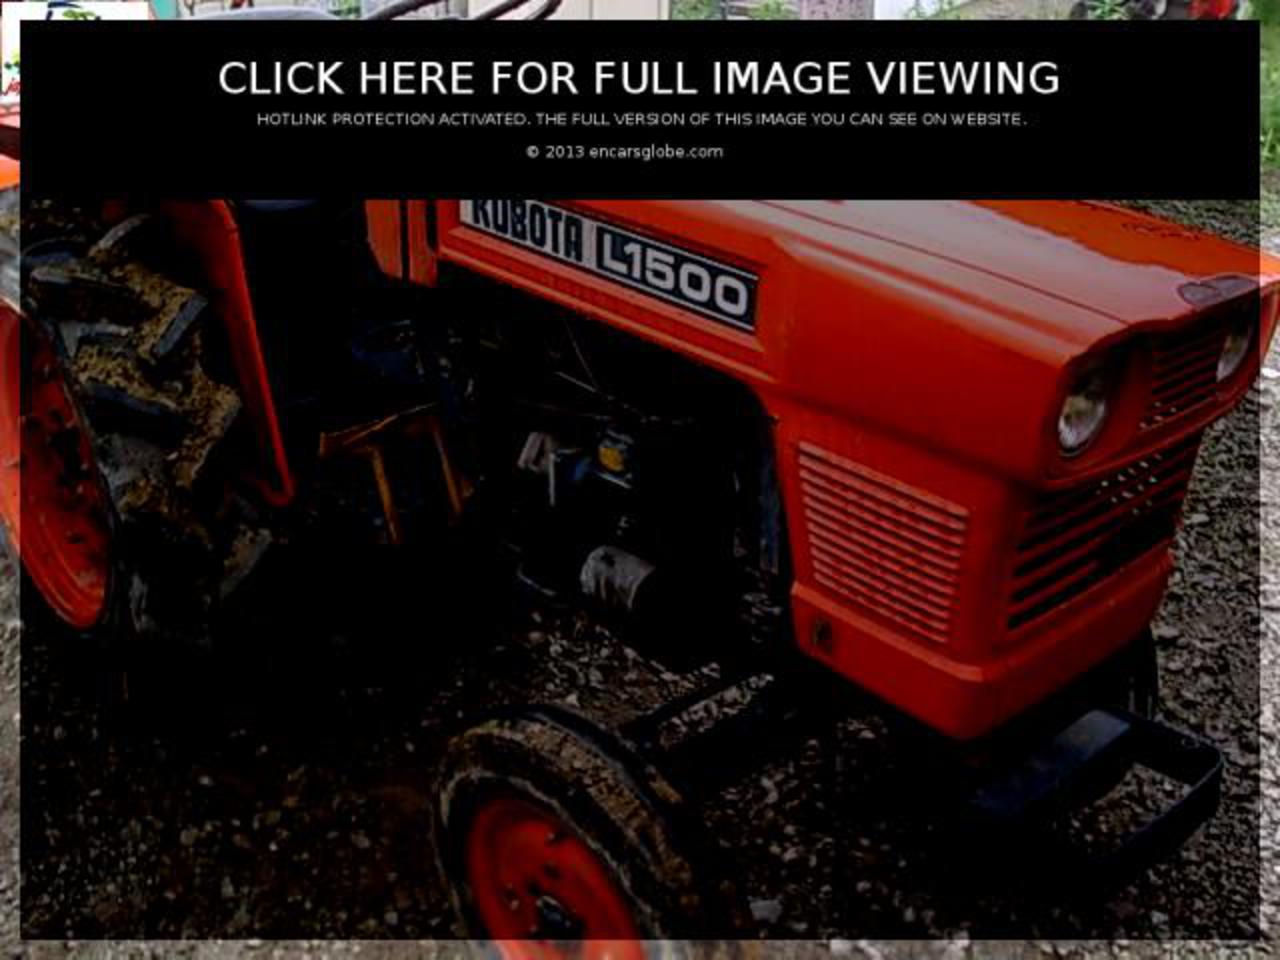 Kubota L-1500: Photo gallery, complete information about model ...